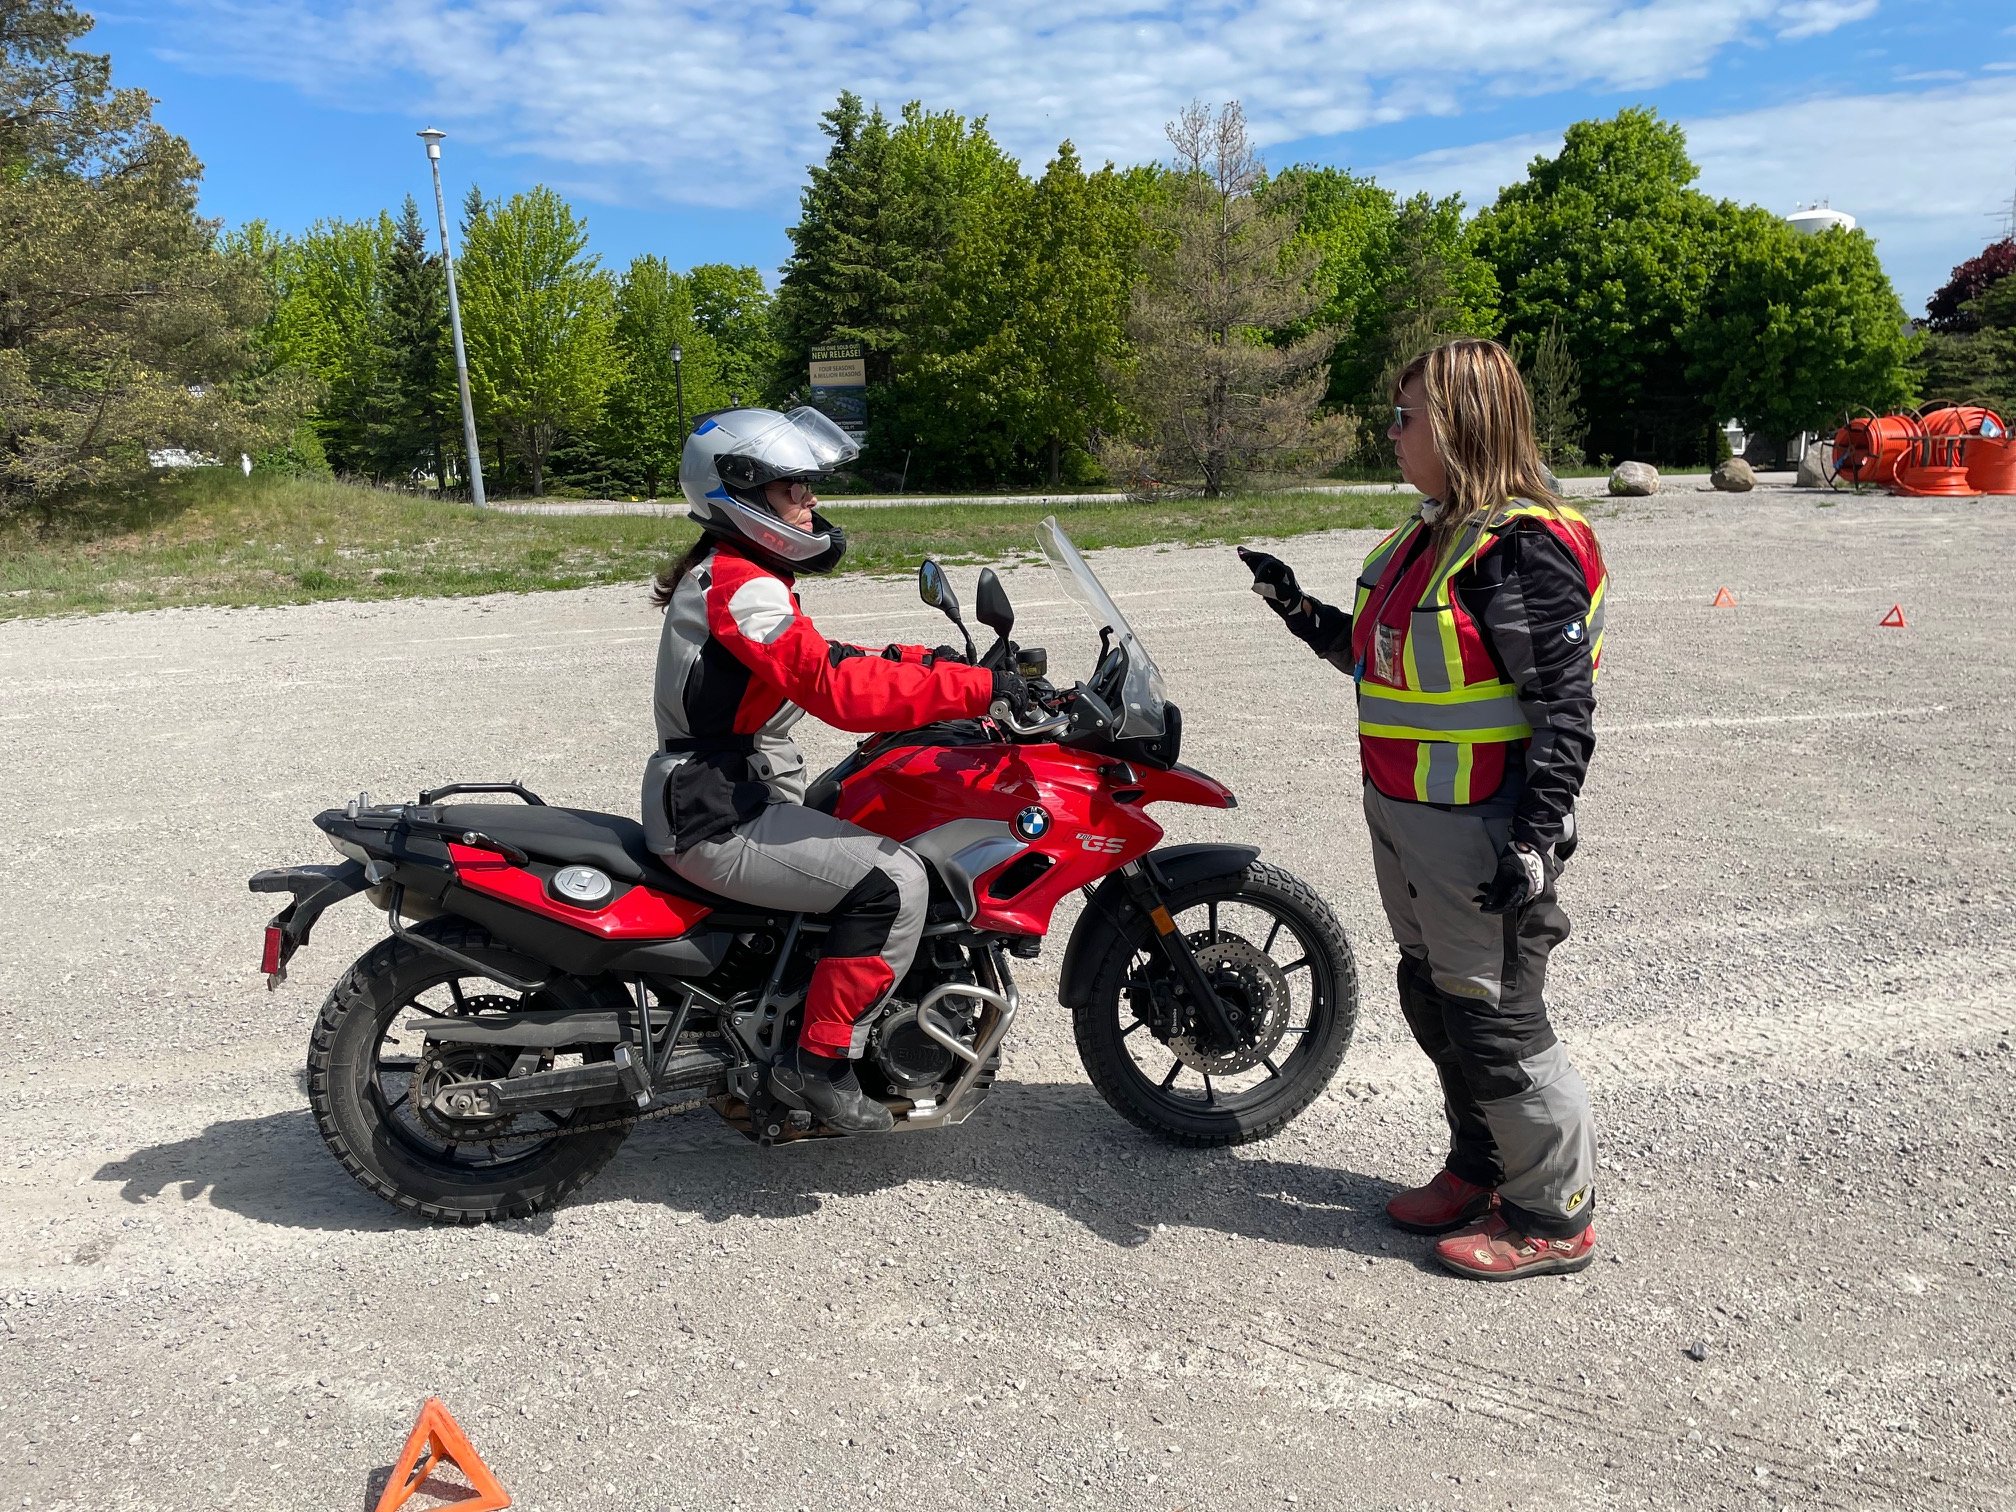  Motorcycle instructor talking to rider on motorcycle. 